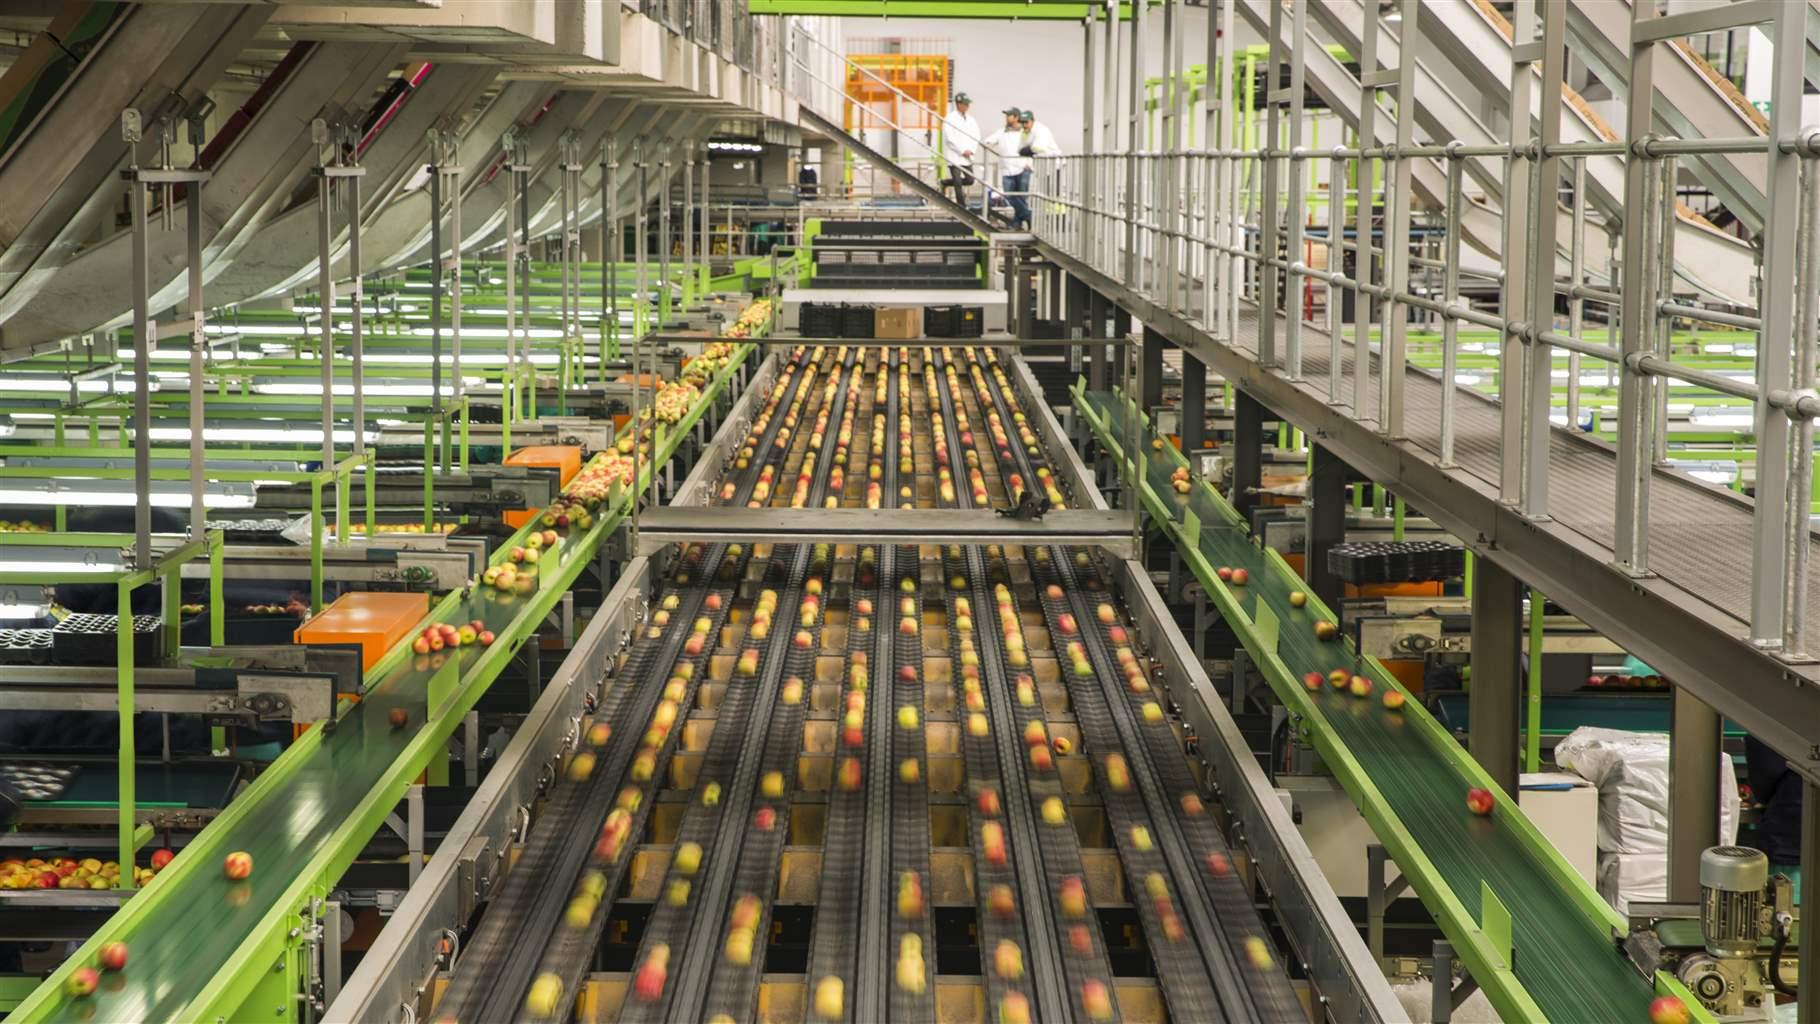 Contamination Challenges for Fruit and Vegetable Processors